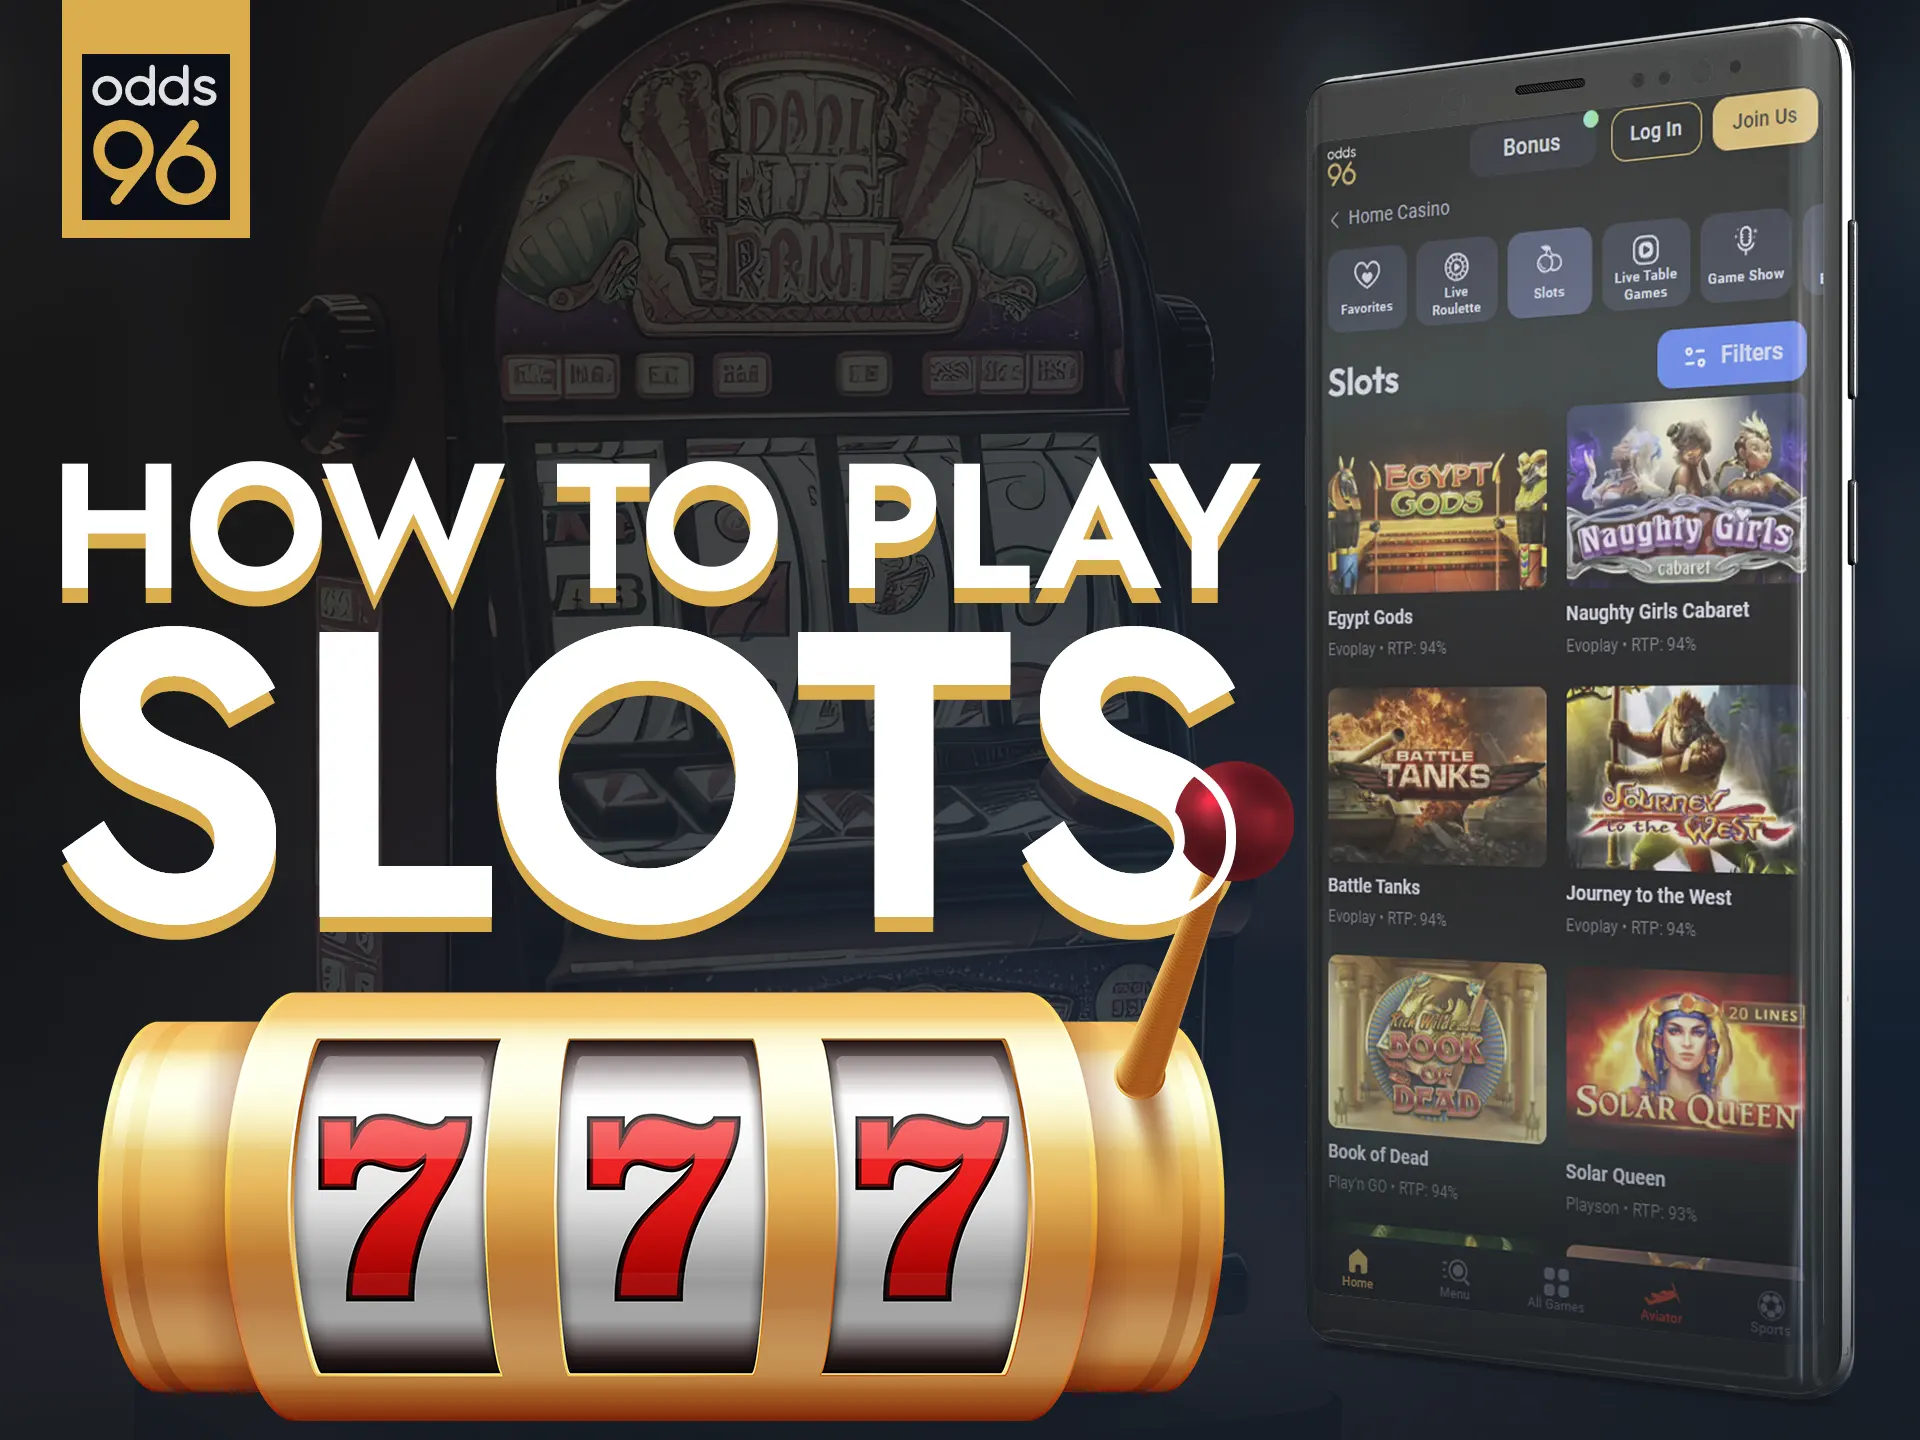 To play slots on Odds96, register and deposit.